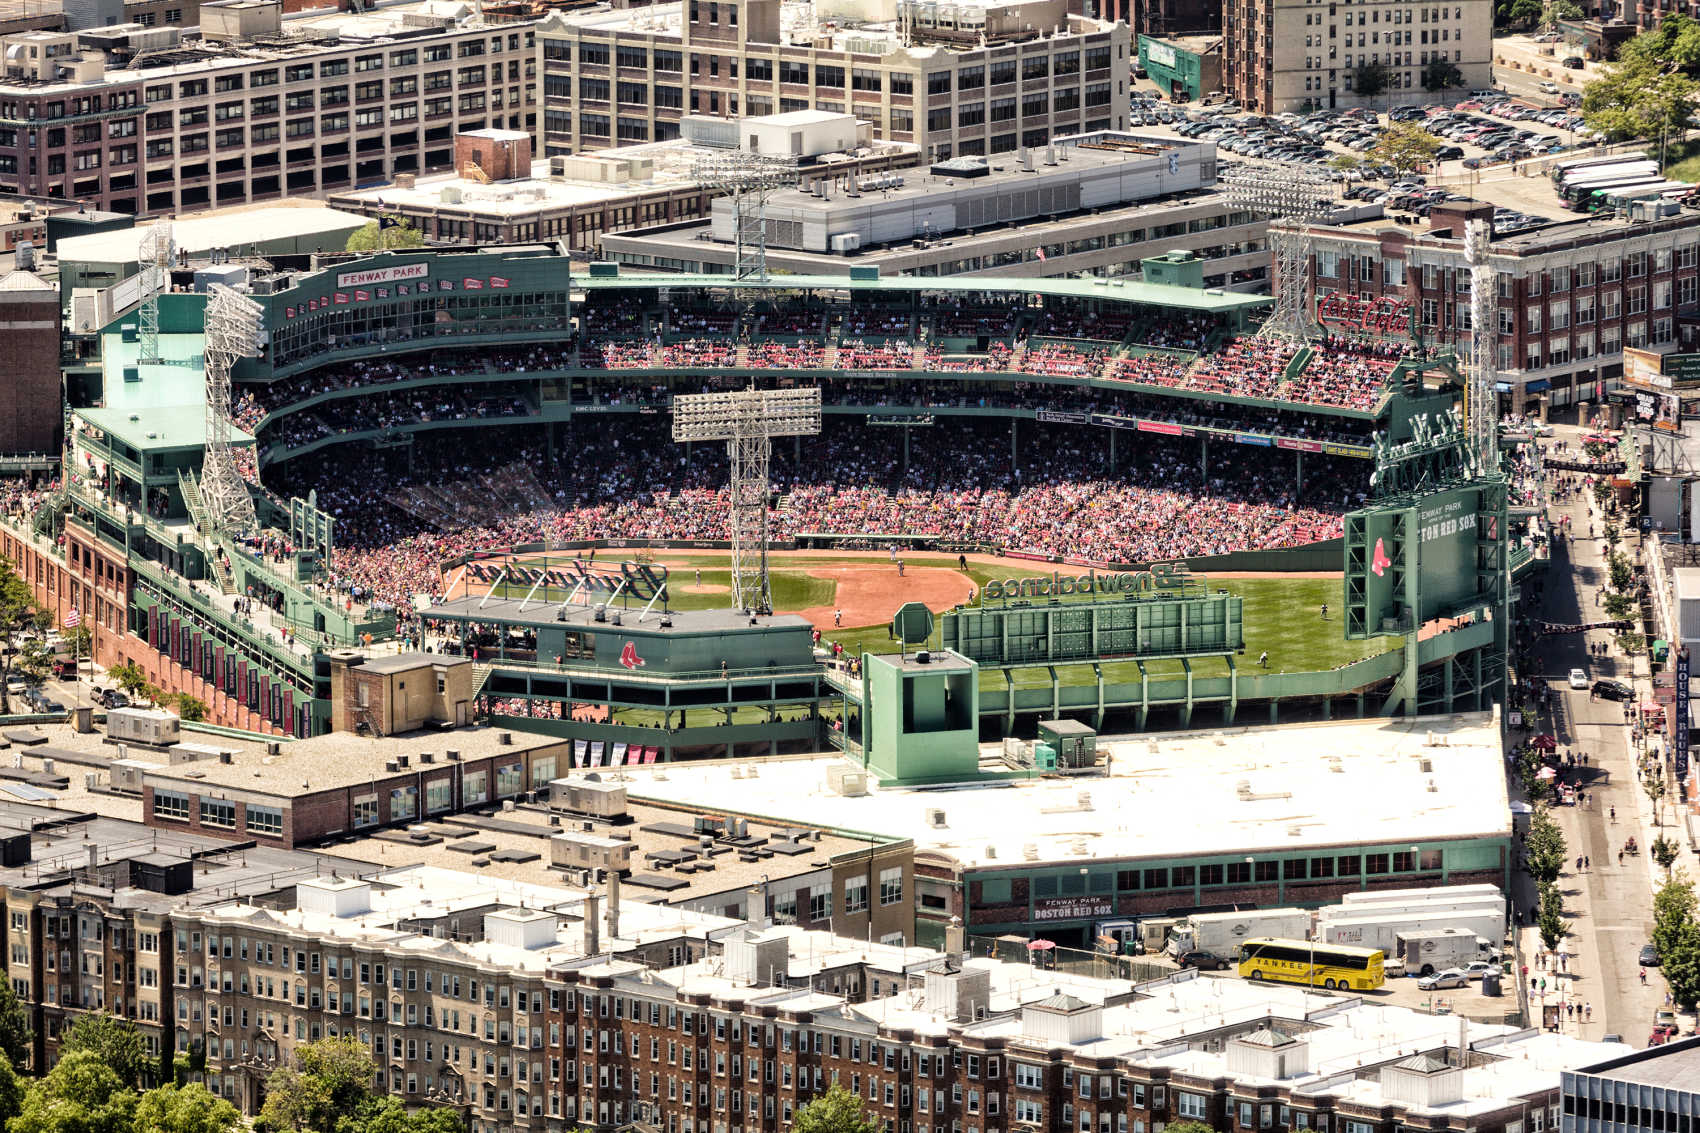 Wasabi Technologies Partners with the Boston Red Sox Through Multi-Year  Sponsorship Deal with Fenway Sports Group